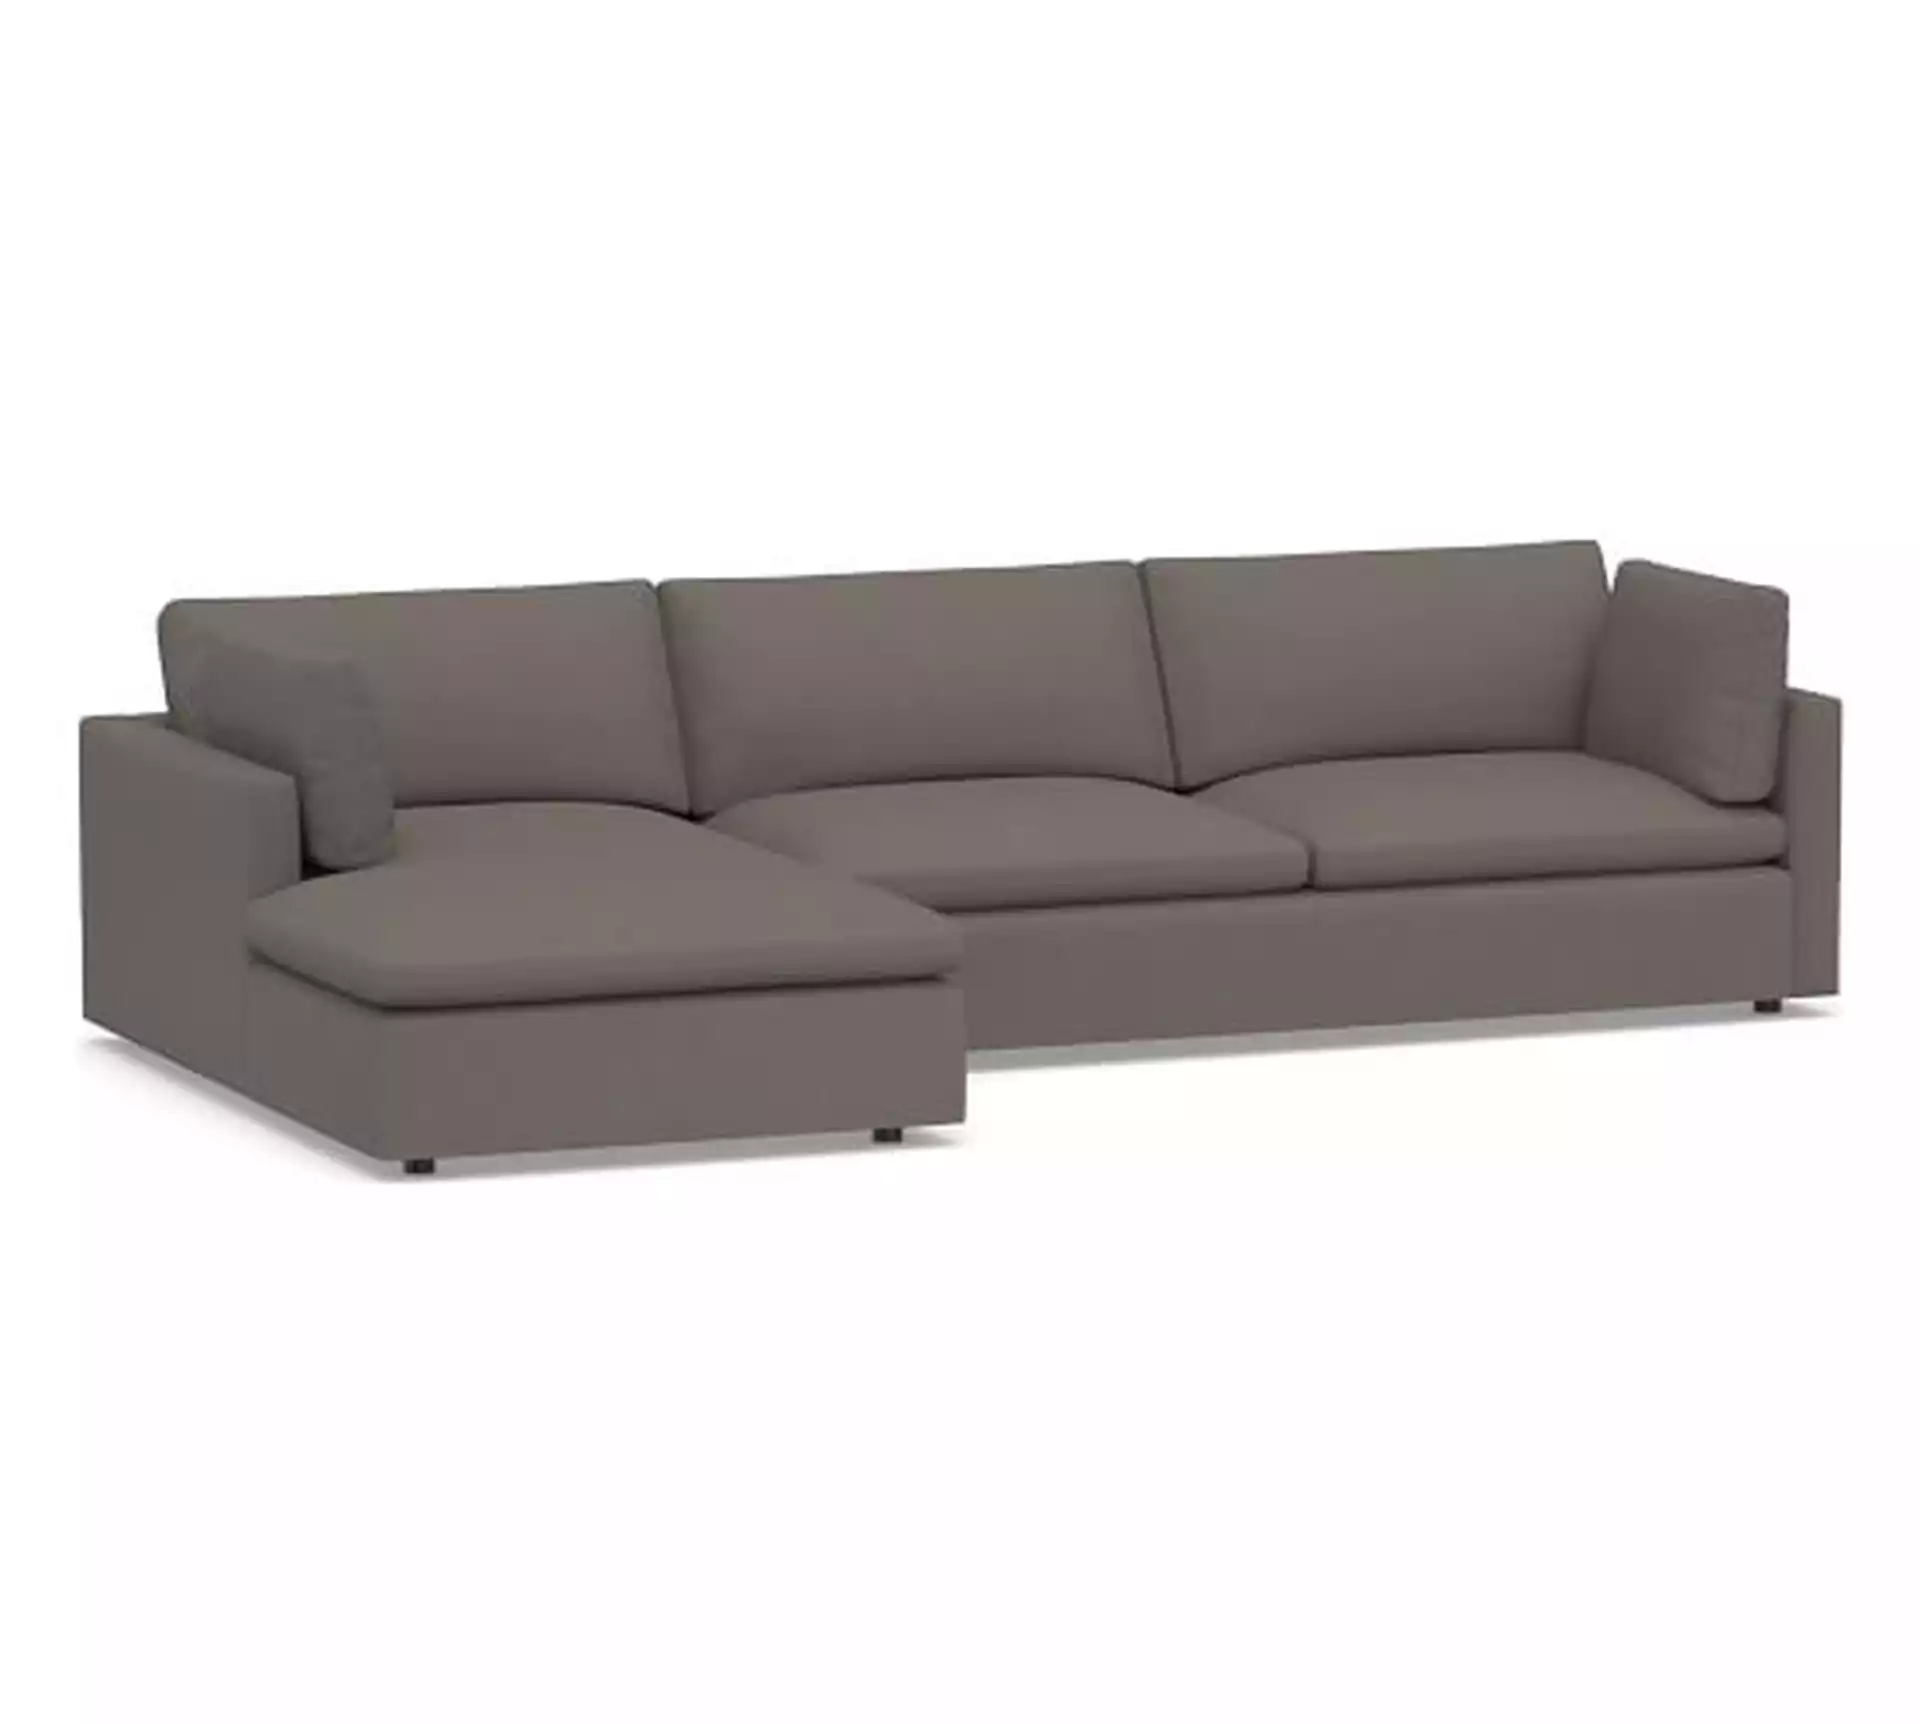 Bolinas Upholstered Right Arm Sofa with Chaise Sectional, Down Blend Wrapped Cushions, Performance Heathered Tweed Graphite